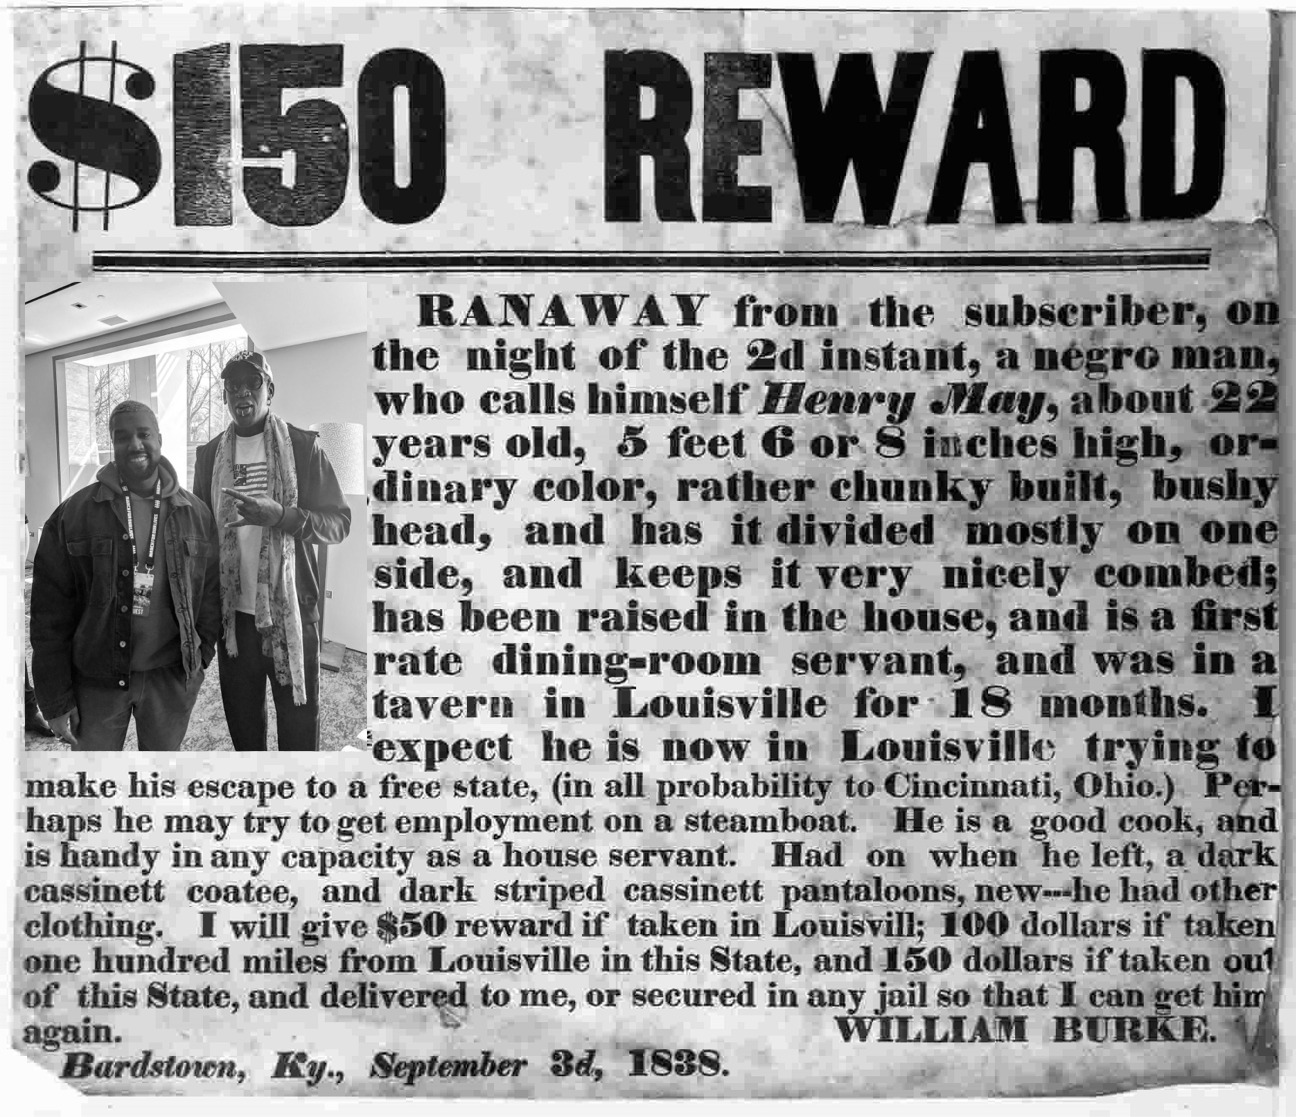 impact of underground railroad - $150 Reward Ranaway from the subseriber, on the night of the 2d instant, a negro man, who calls himself Henry May, about 22 years old, 5 feet 6 or 8 inches high, or dinary color, rather chunky built, bushy head, and has it